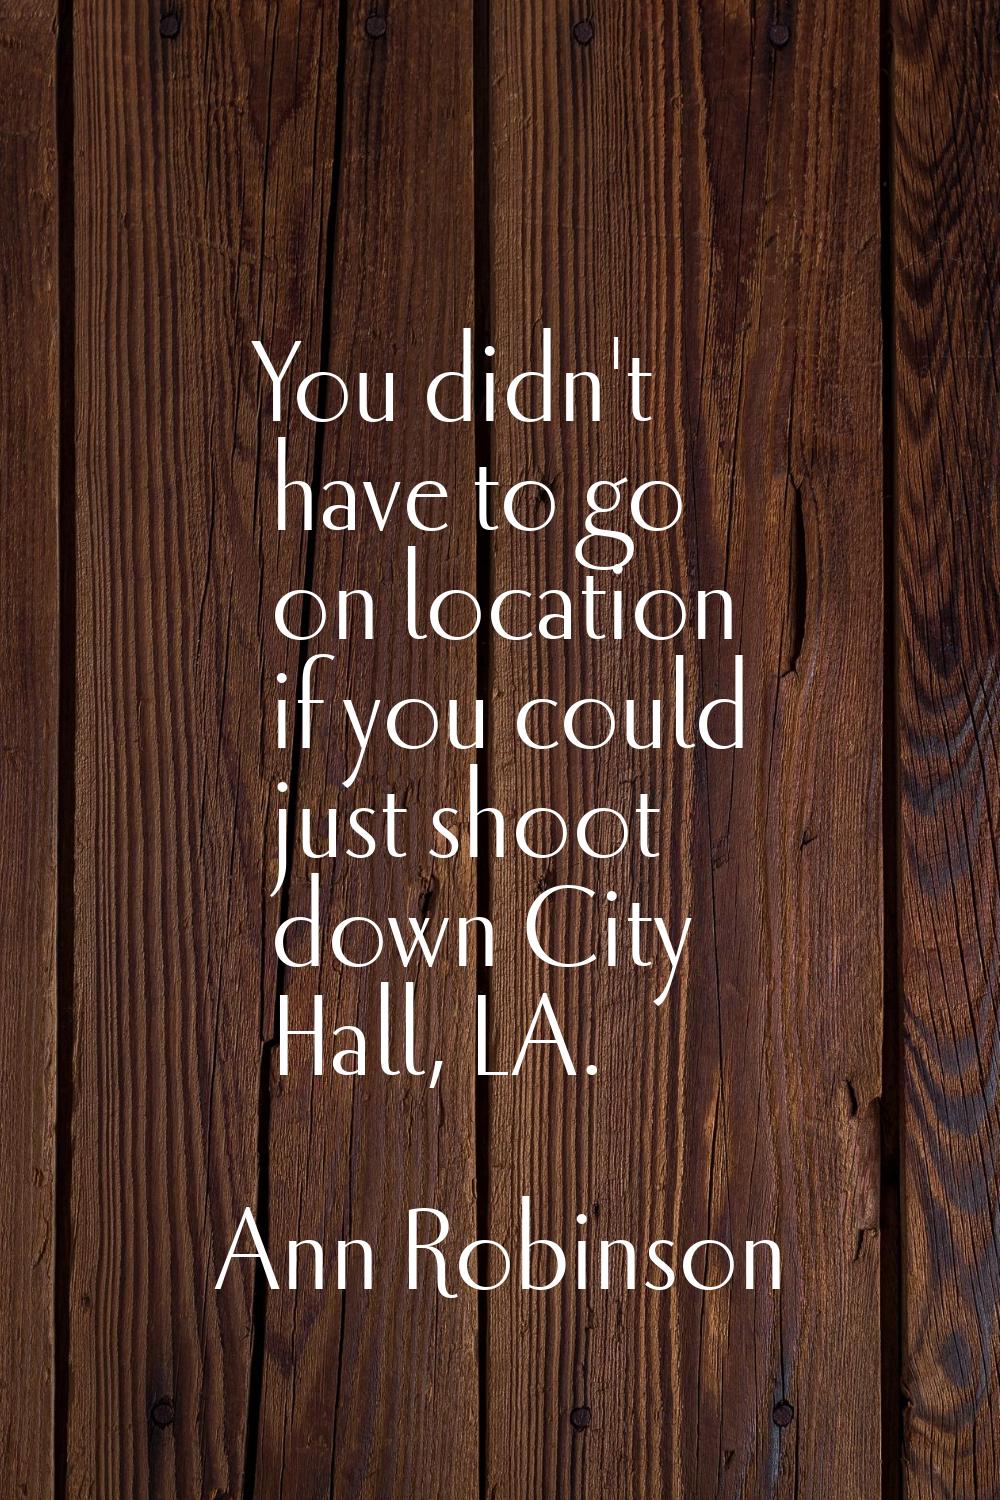 You didn't have to go on location if you could just shoot down City Hall, LA.